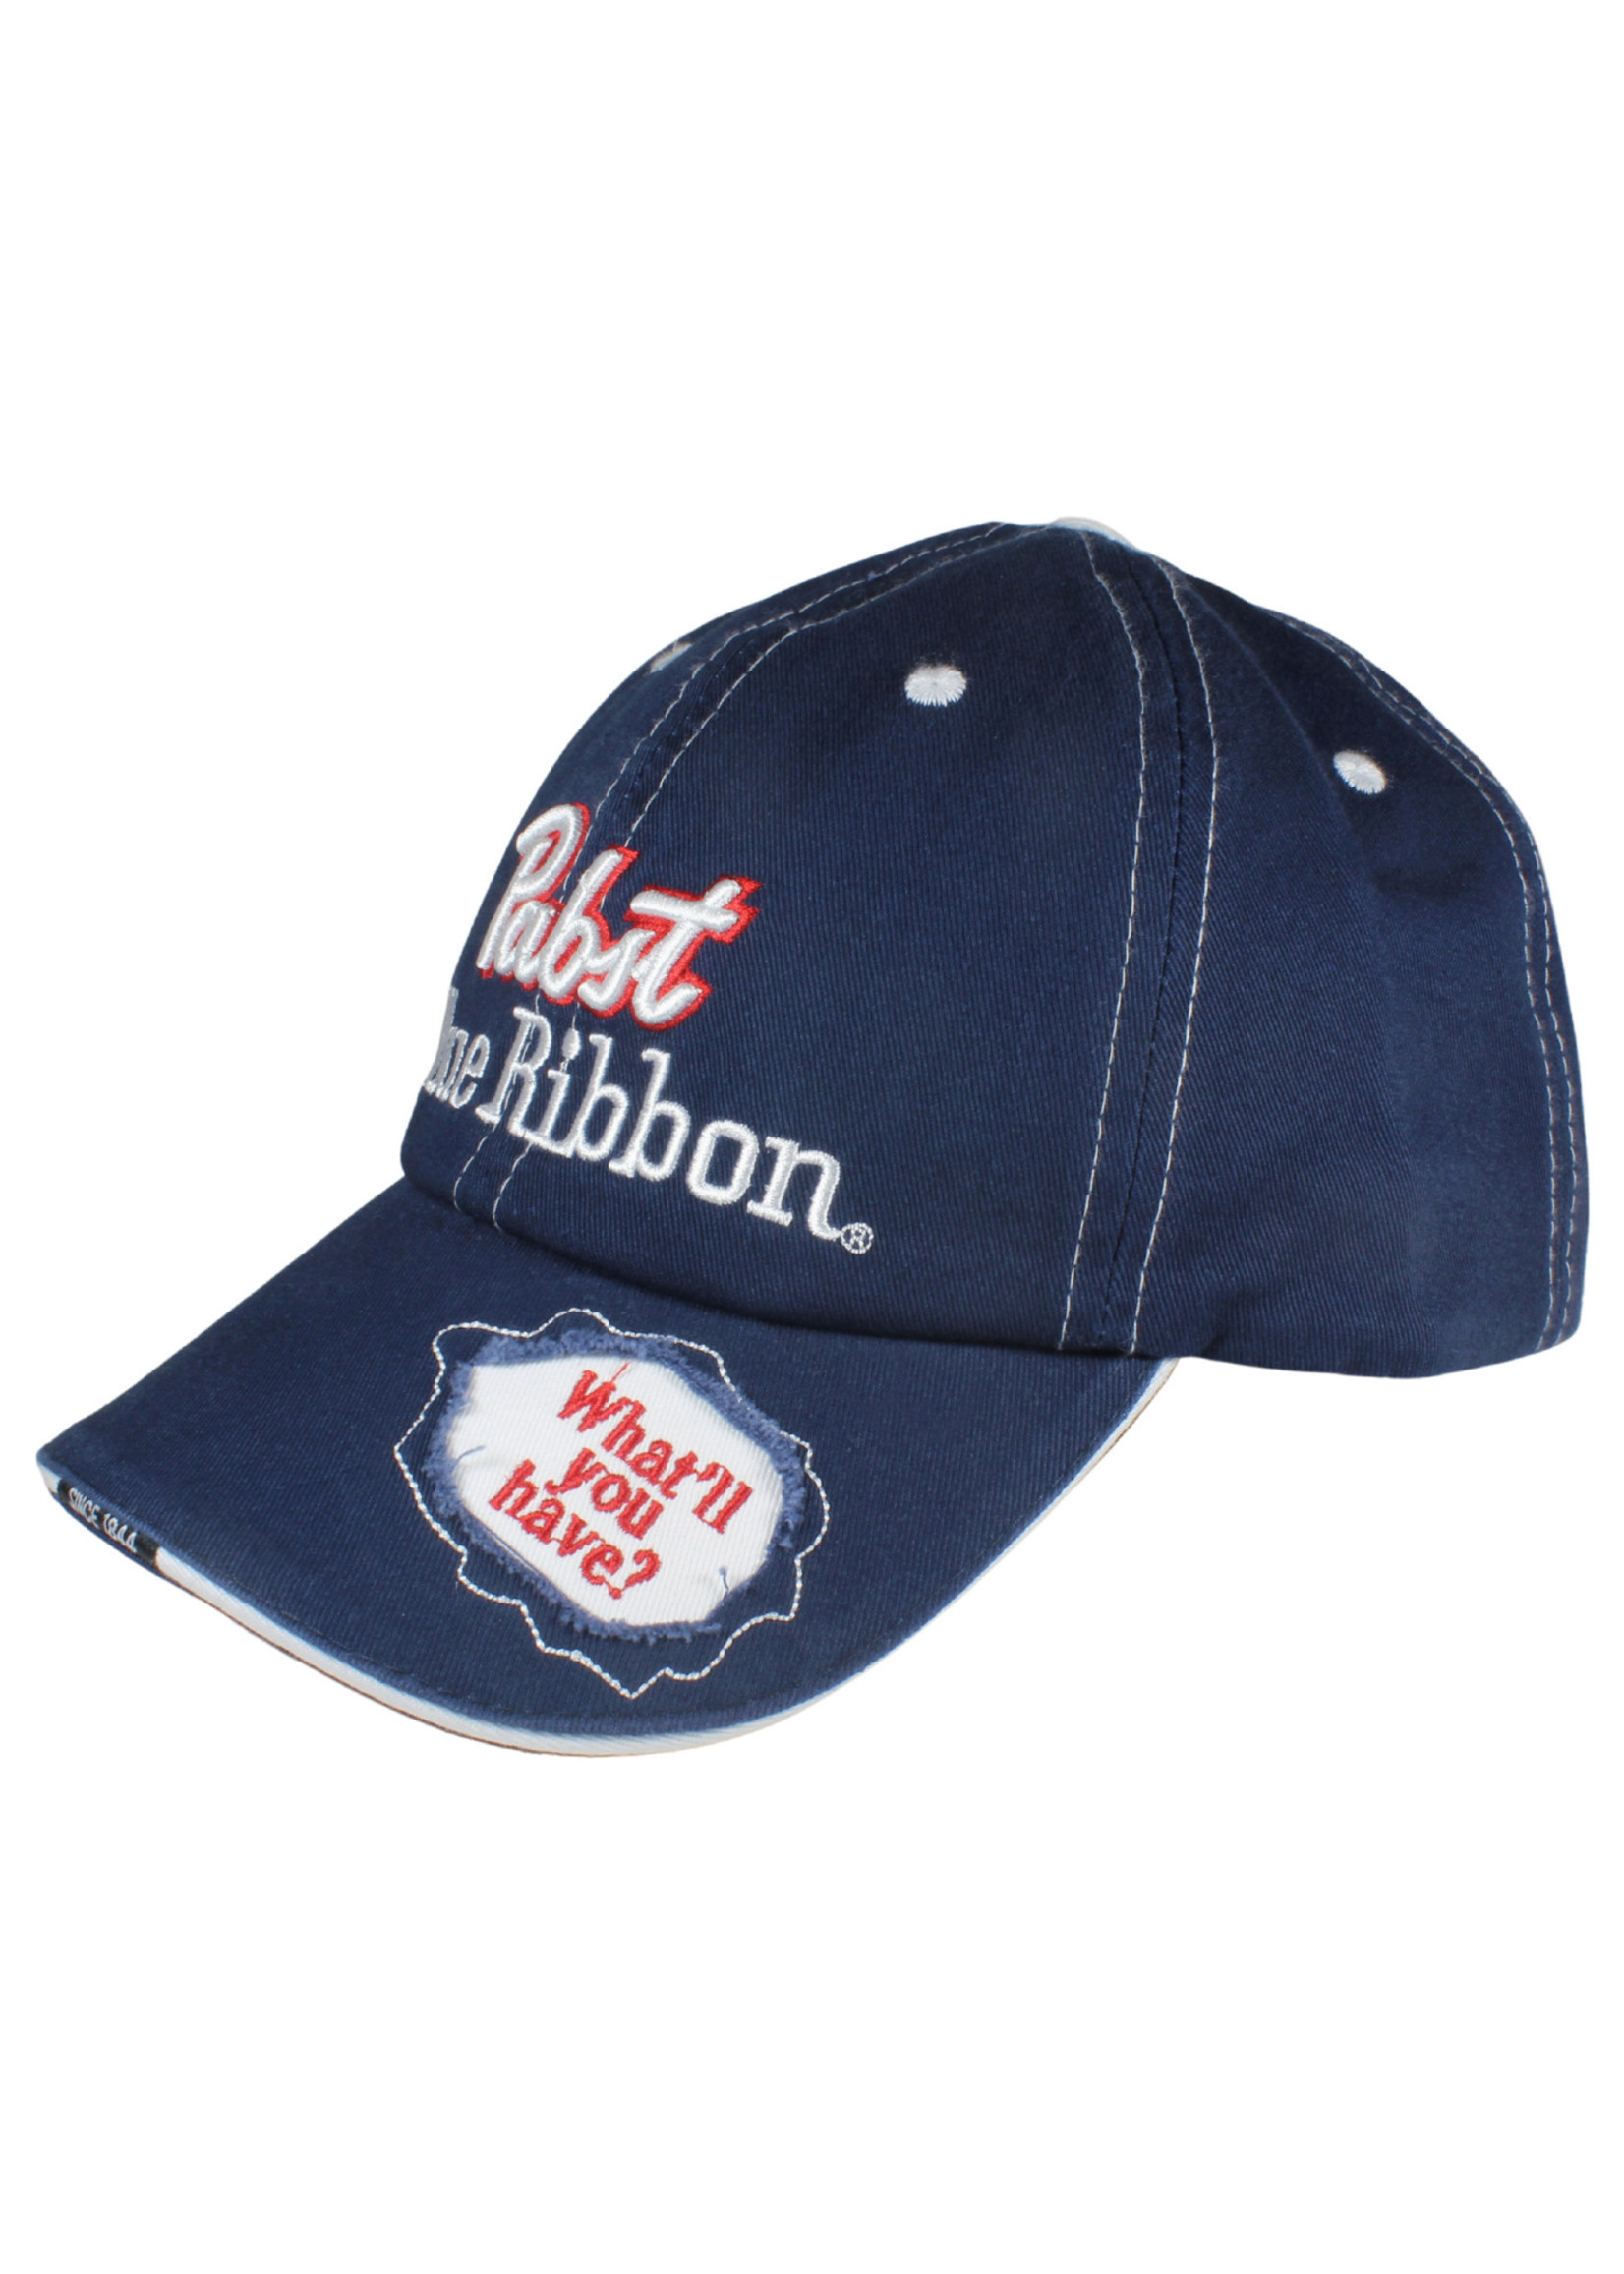 Pabst Pabst What'll You Have Tear Out Cap